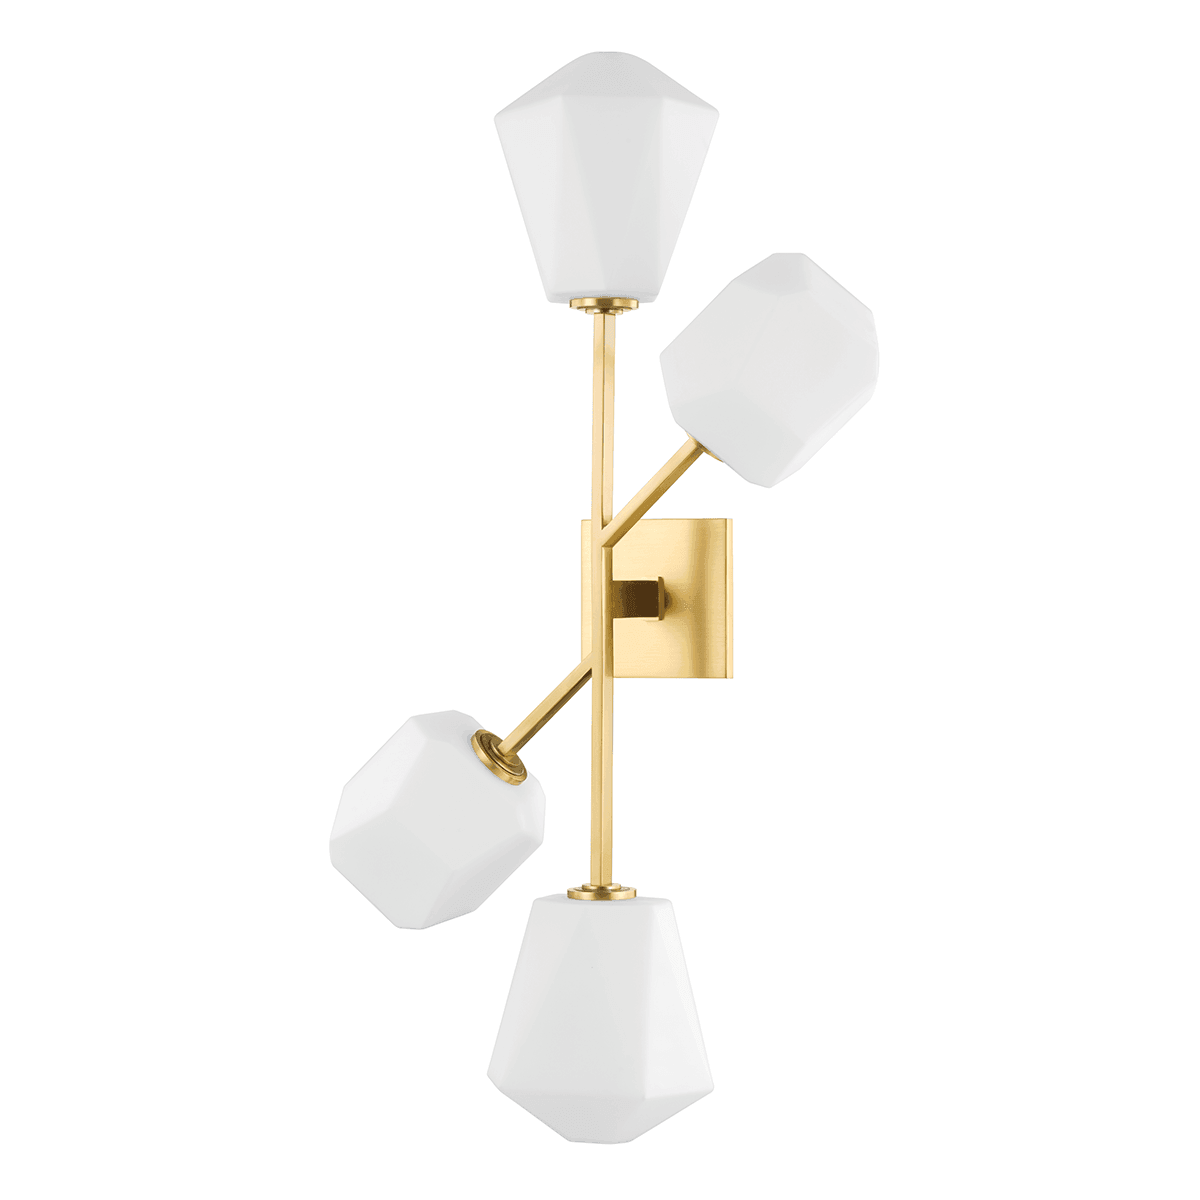 Hudson Valley Lighting - Tring LED Wall Sconce - PI1894104-AGB | Montreal Lighting & Hardware